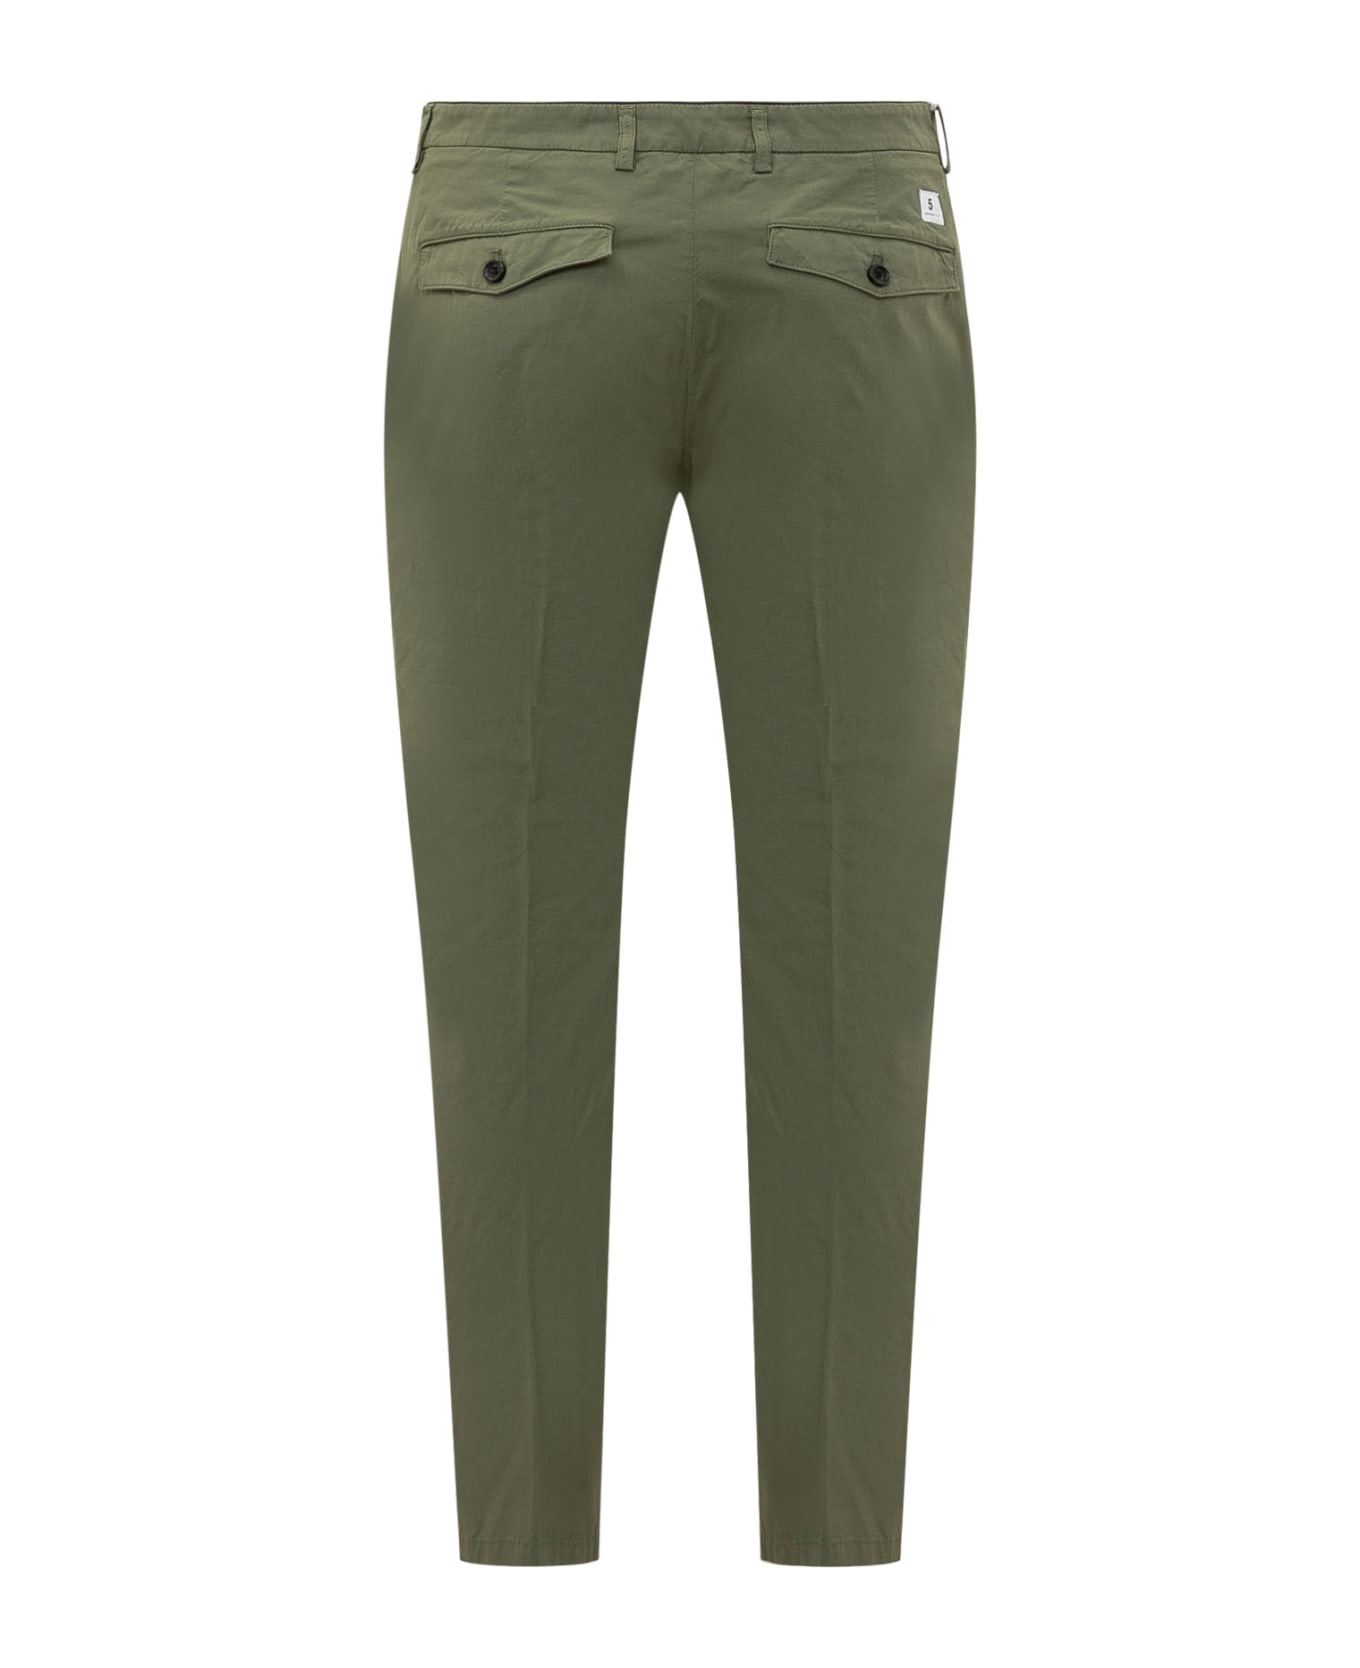 Department Five Prince Chino Pants - MILITARE